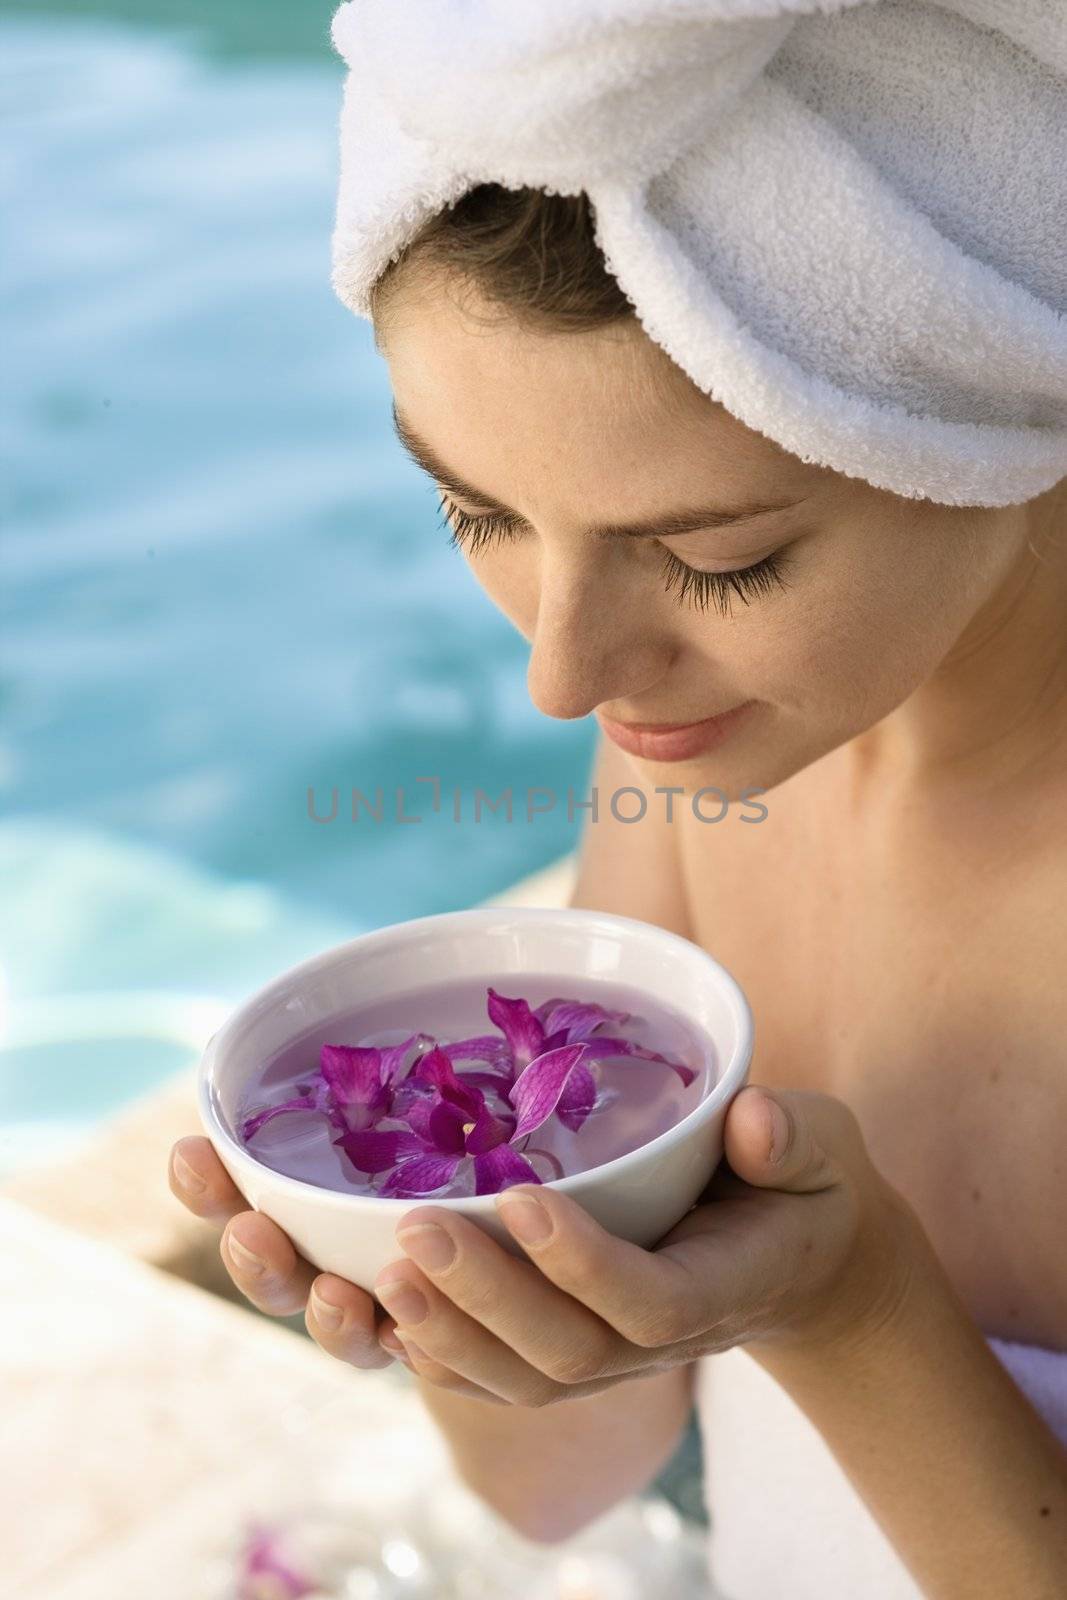 Caucasian mid-adult woman wearing towel around head and body holding bowl of purple orchids next to pool.